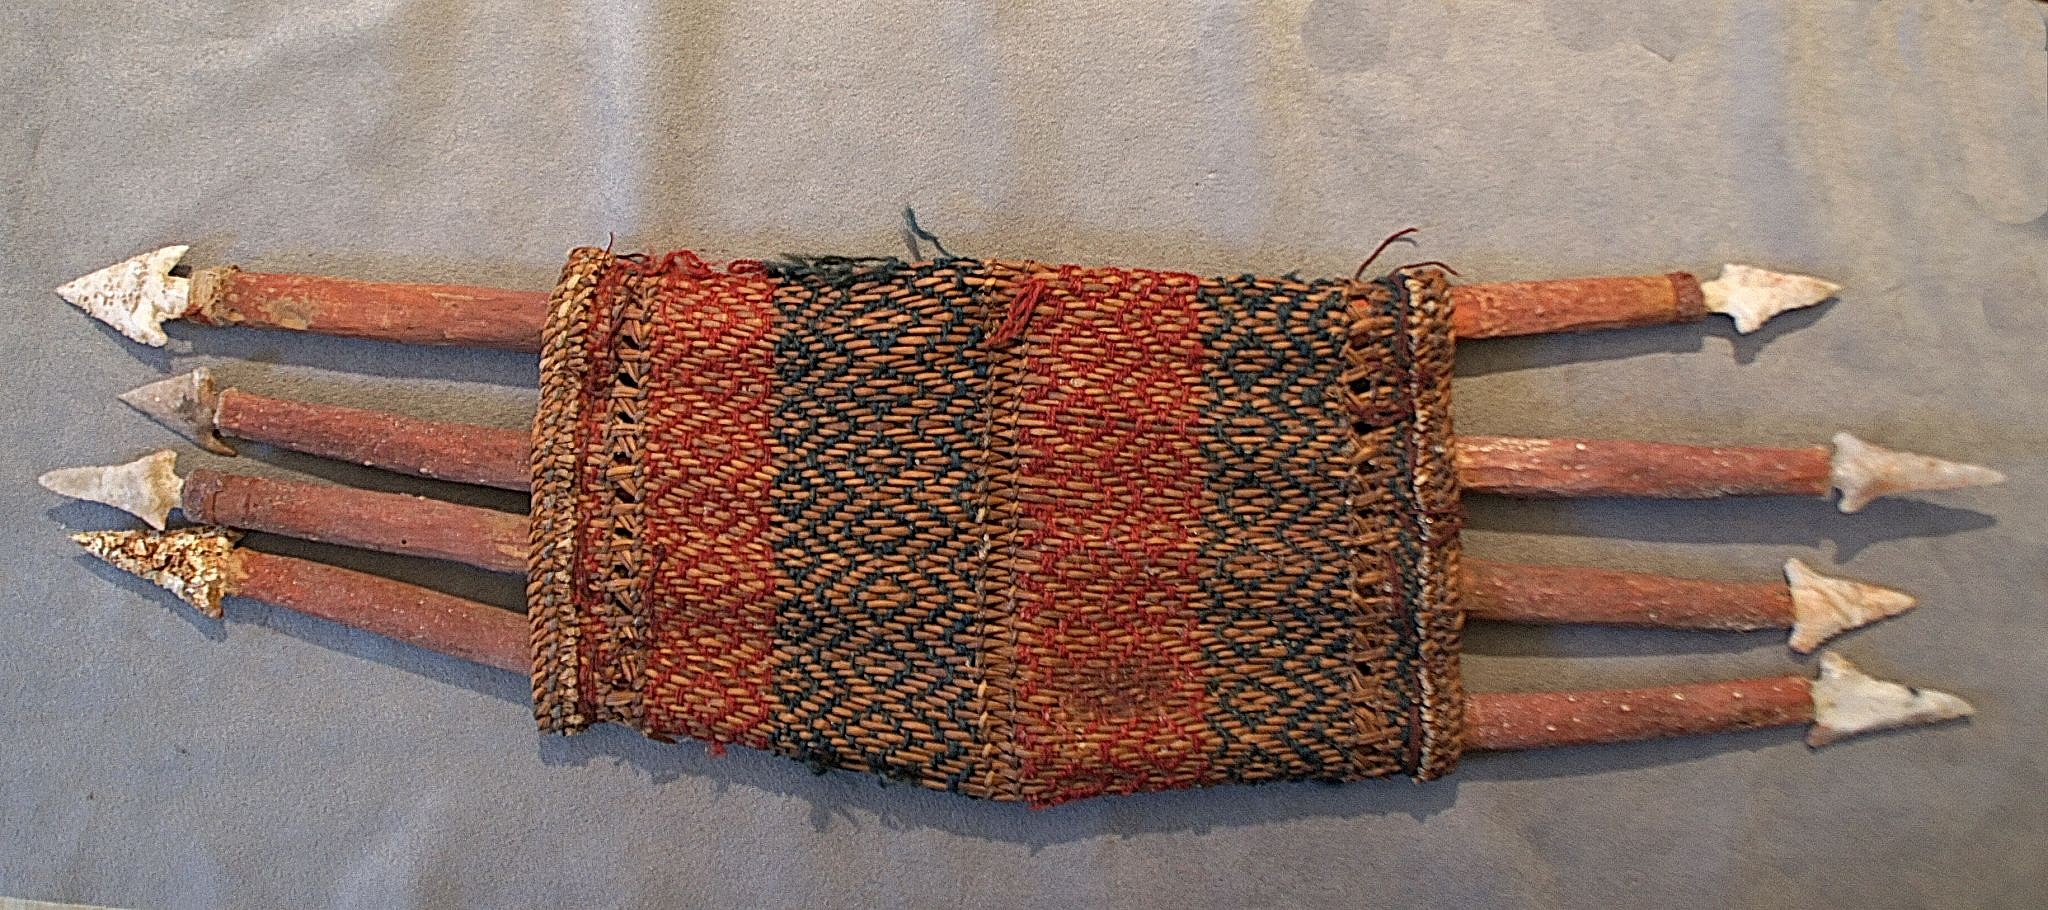 Chile, Arica Harpoon Quiver With Eight Harpoons
This decorative fiber quiver is woven with dyed red and green reeds, and is intact with its original wood harpoon points and napped stone arrows.  The wood harpoon points would have been set into a longer throwing stick; the point releases when the harpoon is retrieved. The quiver, also known as a porta harpoon (harpoon carrier) holds eight points.  It was used by the fisherman to hold ammunition on extended fishing trips.  Junius Bird describes and illustrates these porta harpoons in "EXCAVATIONS IN NORTHERN CHILE," 1943, pg. 223.  The harpoons are painted red, which was ceremonial and indicates that they were probably for the afterlife
Media: Wood
Dimensions: Length: 23" Width: 7"
n6041